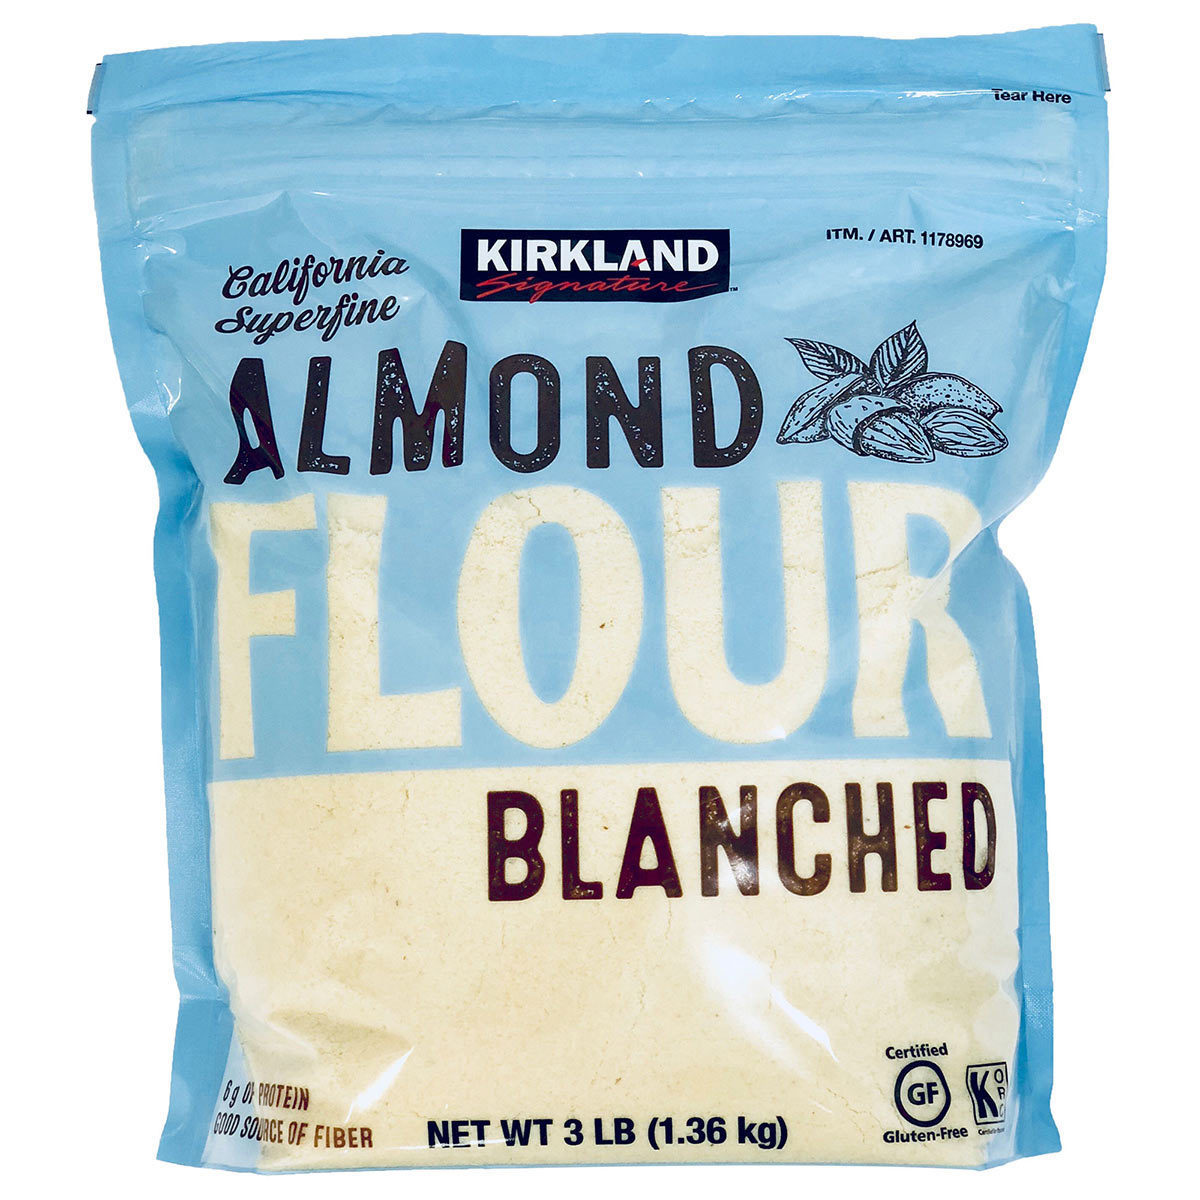 Blue sealed plastic bag with clear window showing Almond Flour